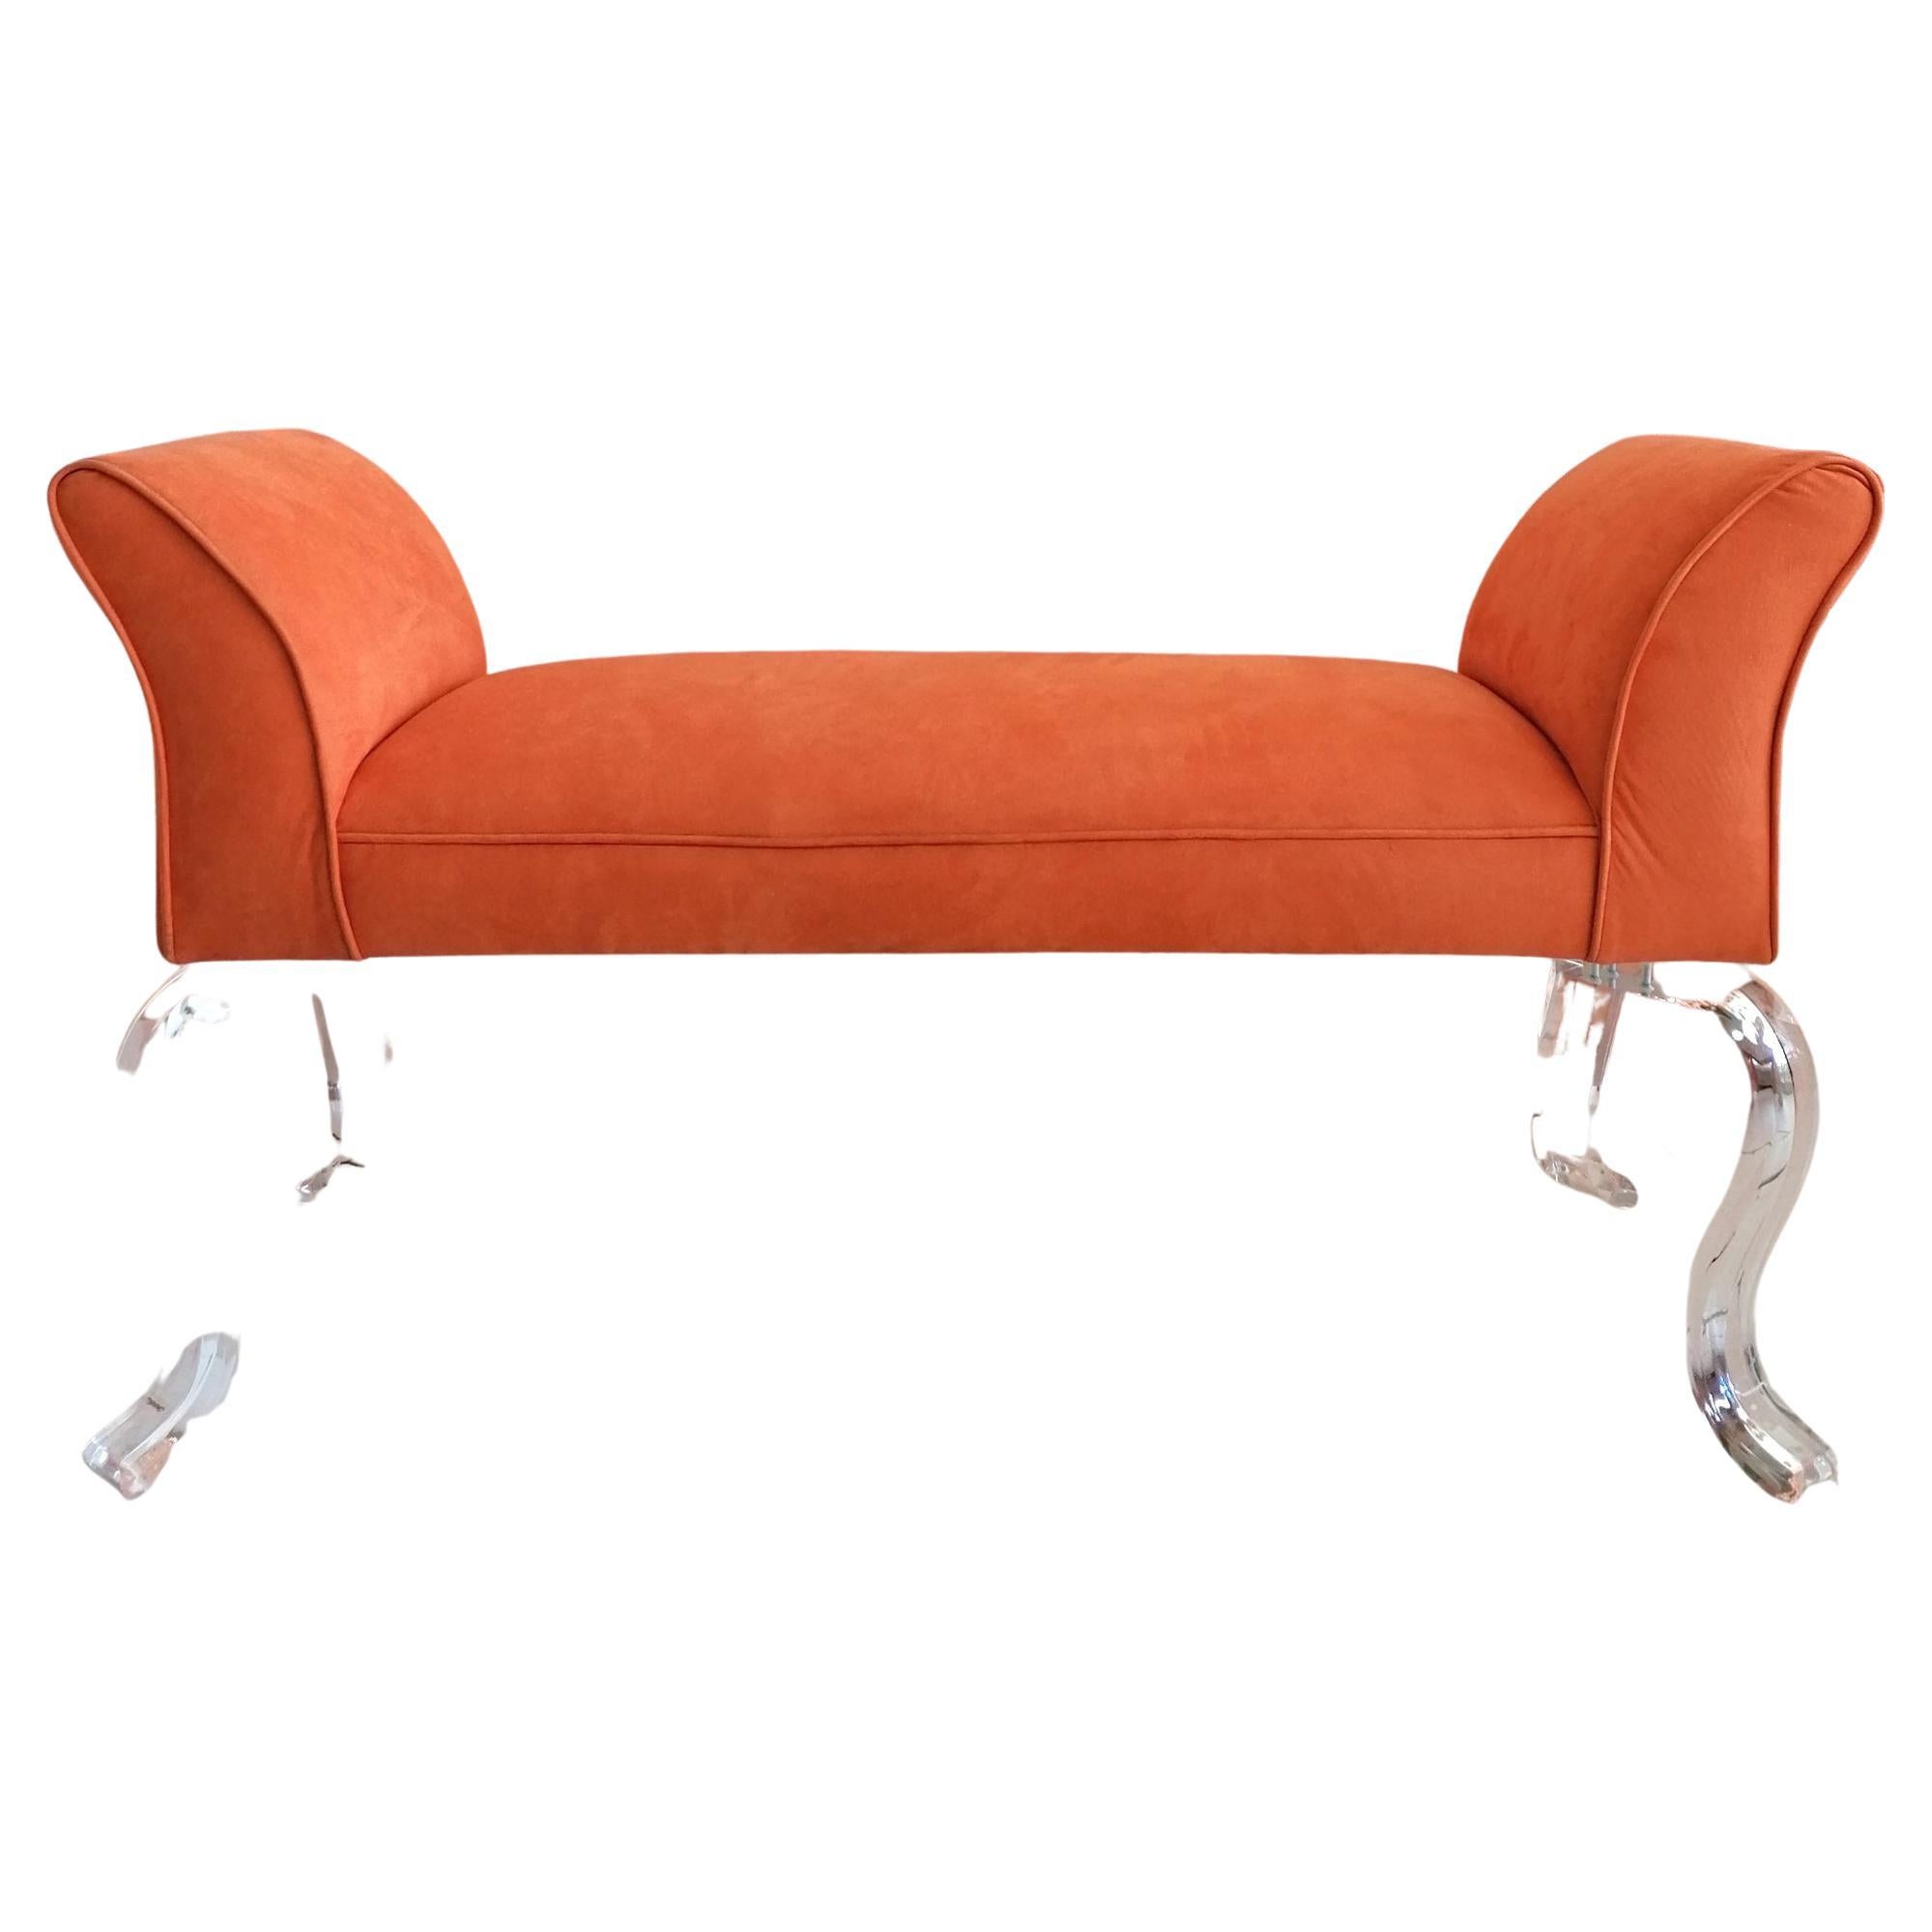 Large Double-Ended Bench with Lucite Curvy Legs, by Shlomi Haziza, USA c1980s